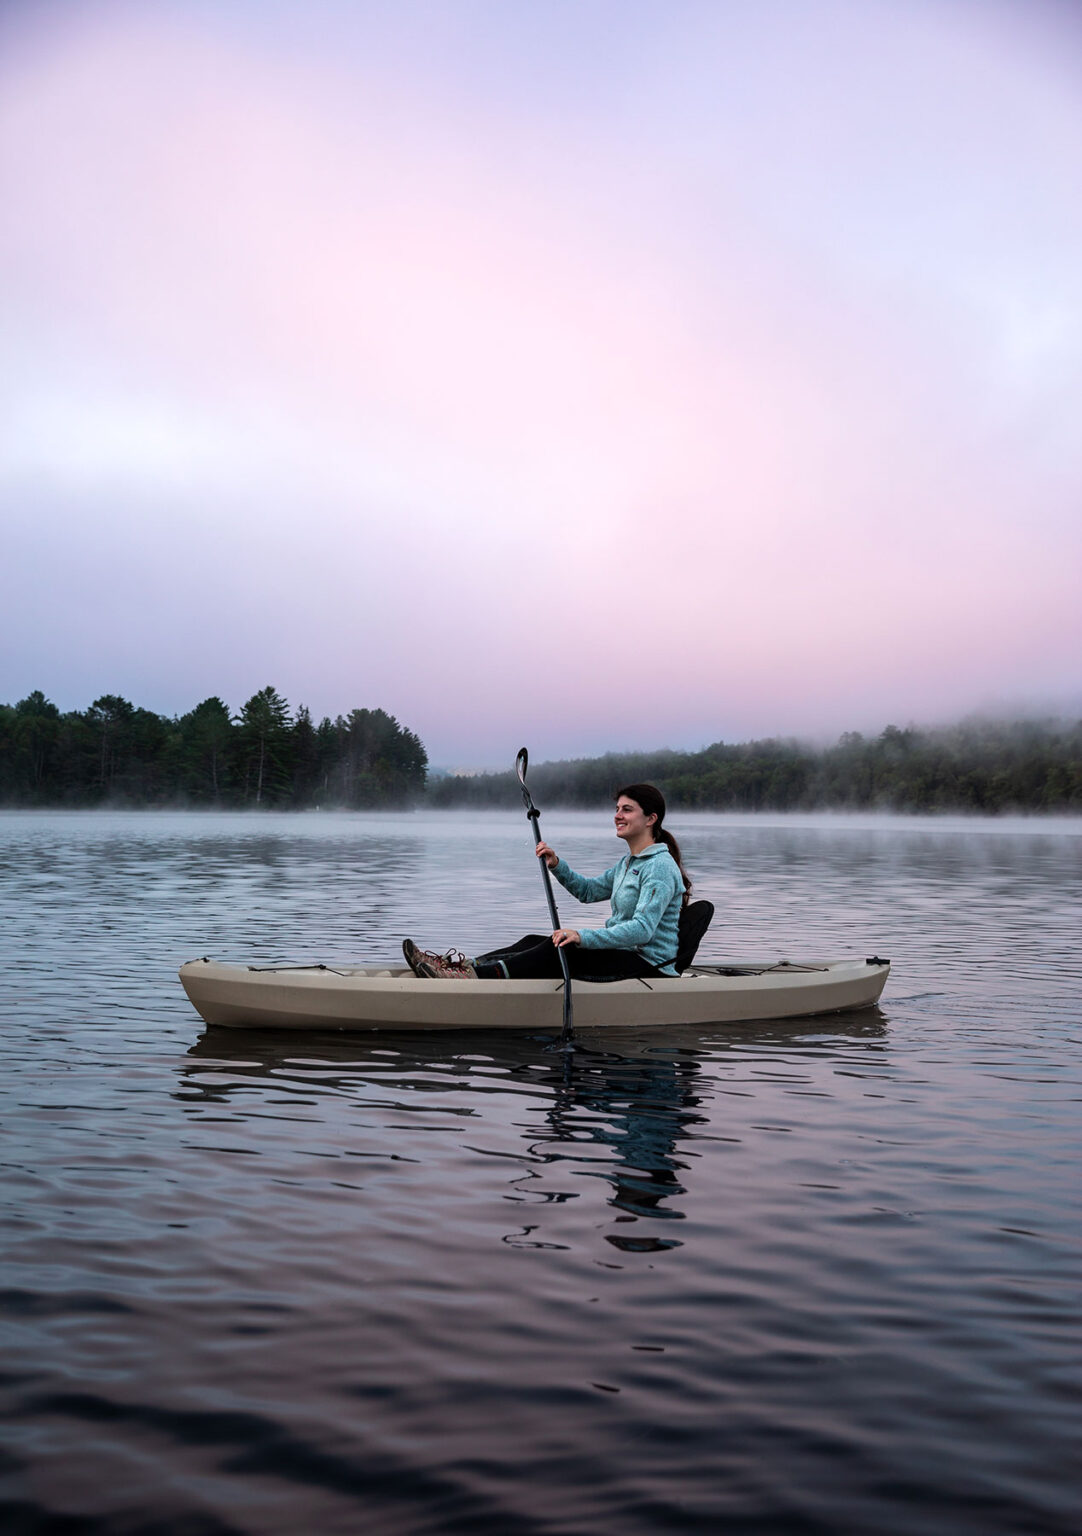 Paddling on Wyman Lake at sunrise in Maine's Kennebec Valley